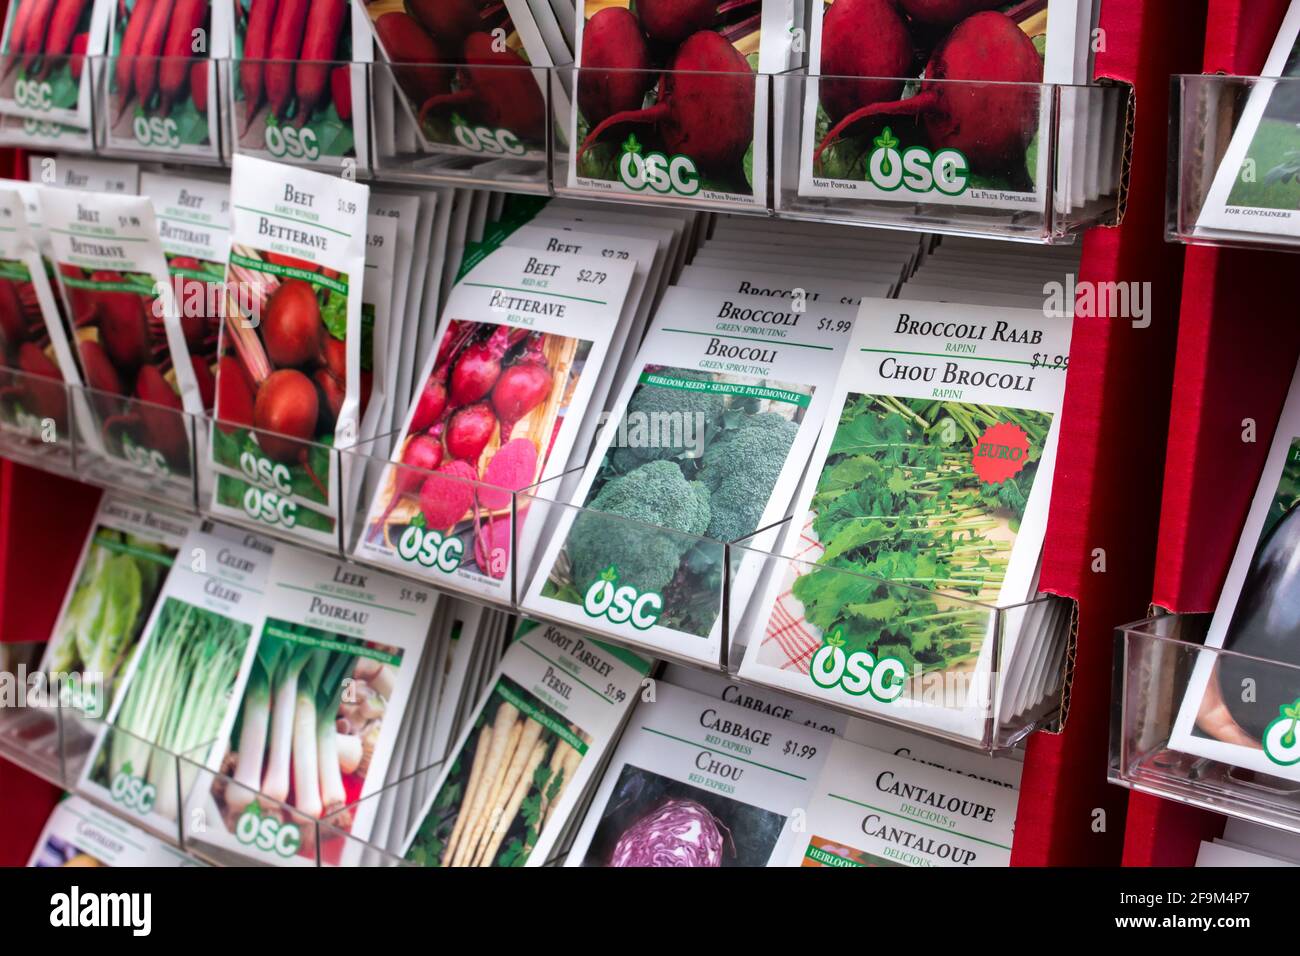 London, Ontario, Canada - March 7 2021: White packets of OSC brand broccoli, beet and cantaloupe seeds lined up on a shelf at Parkway Garden Center. Stock Photo